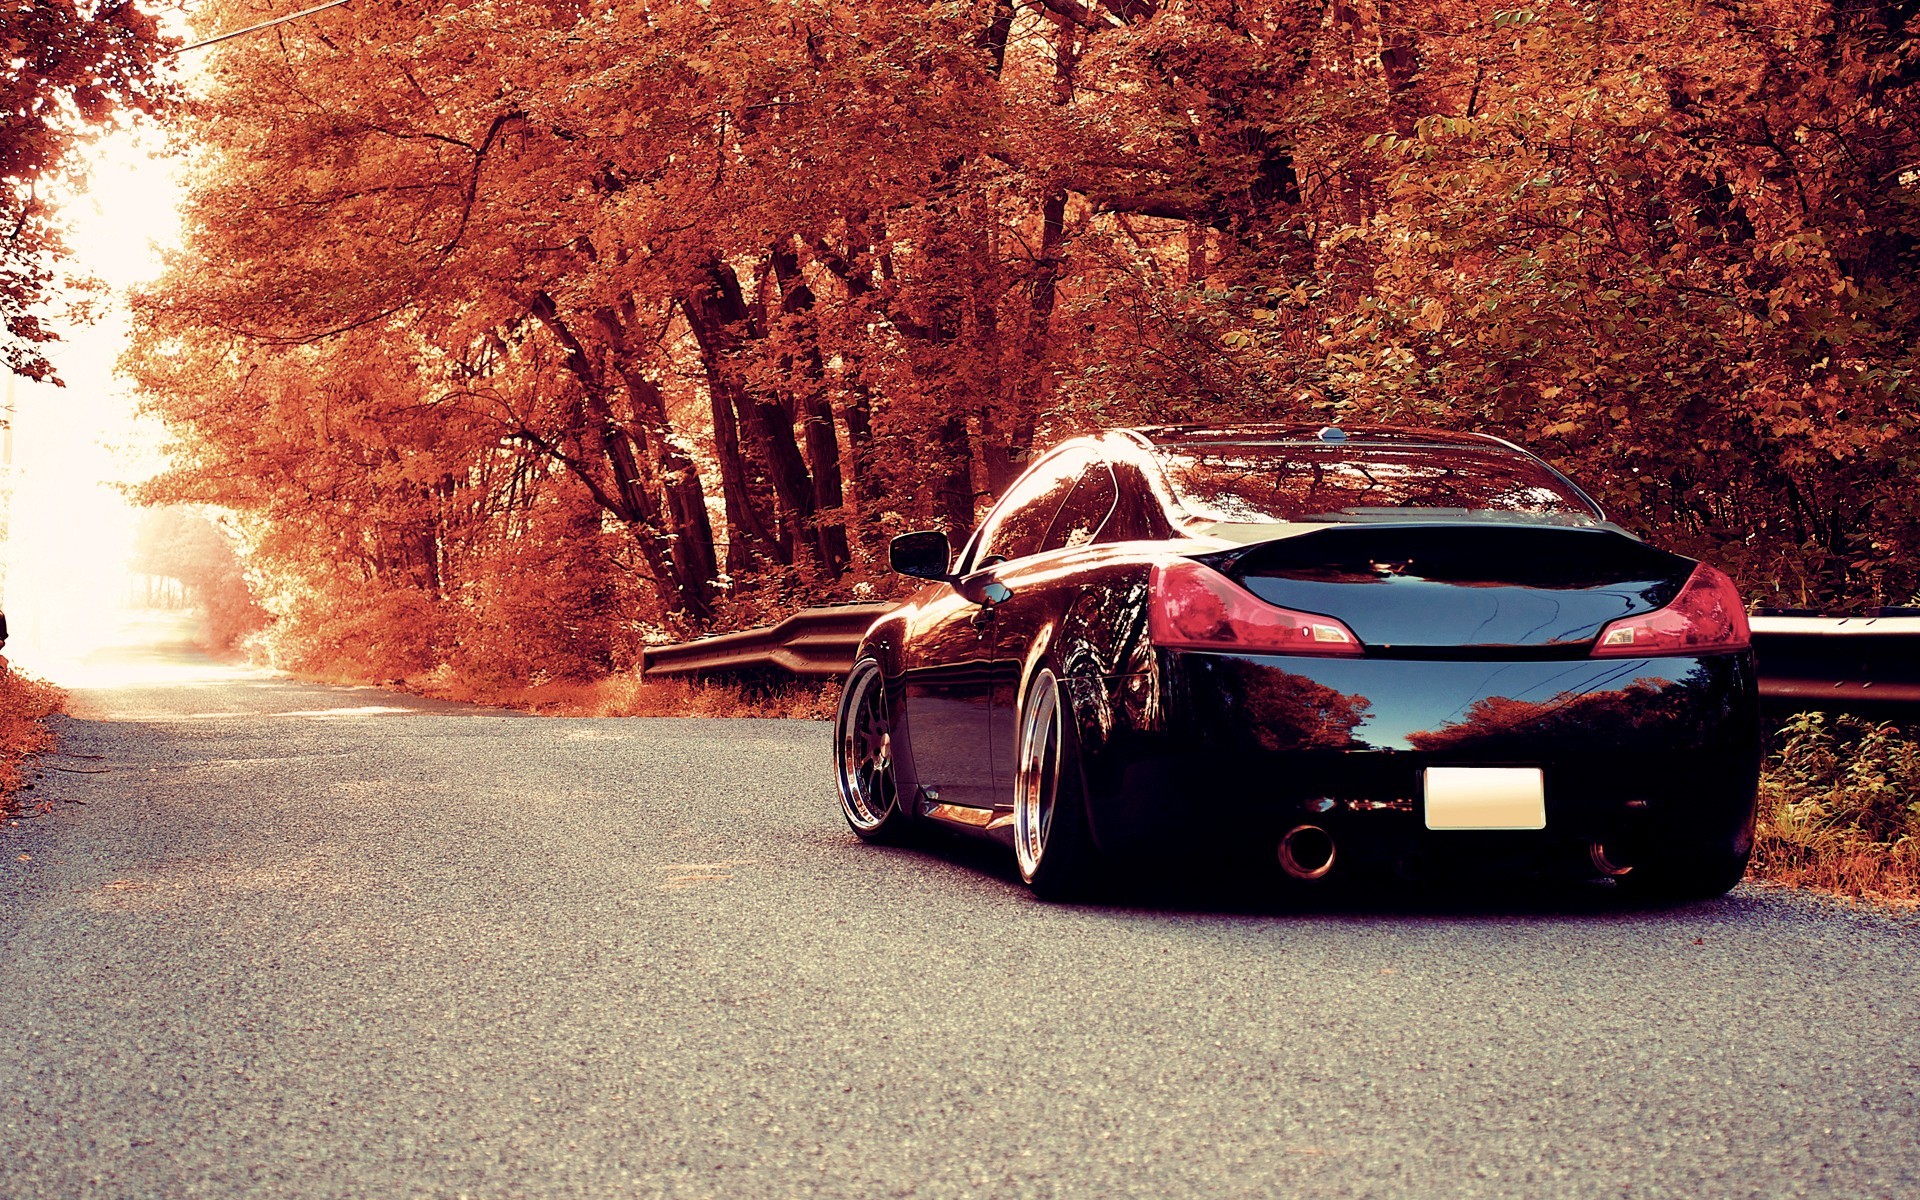 1920x1200 Autumn Cars Forests Infiniti G37 Landscapes Roads Trees Vehicles